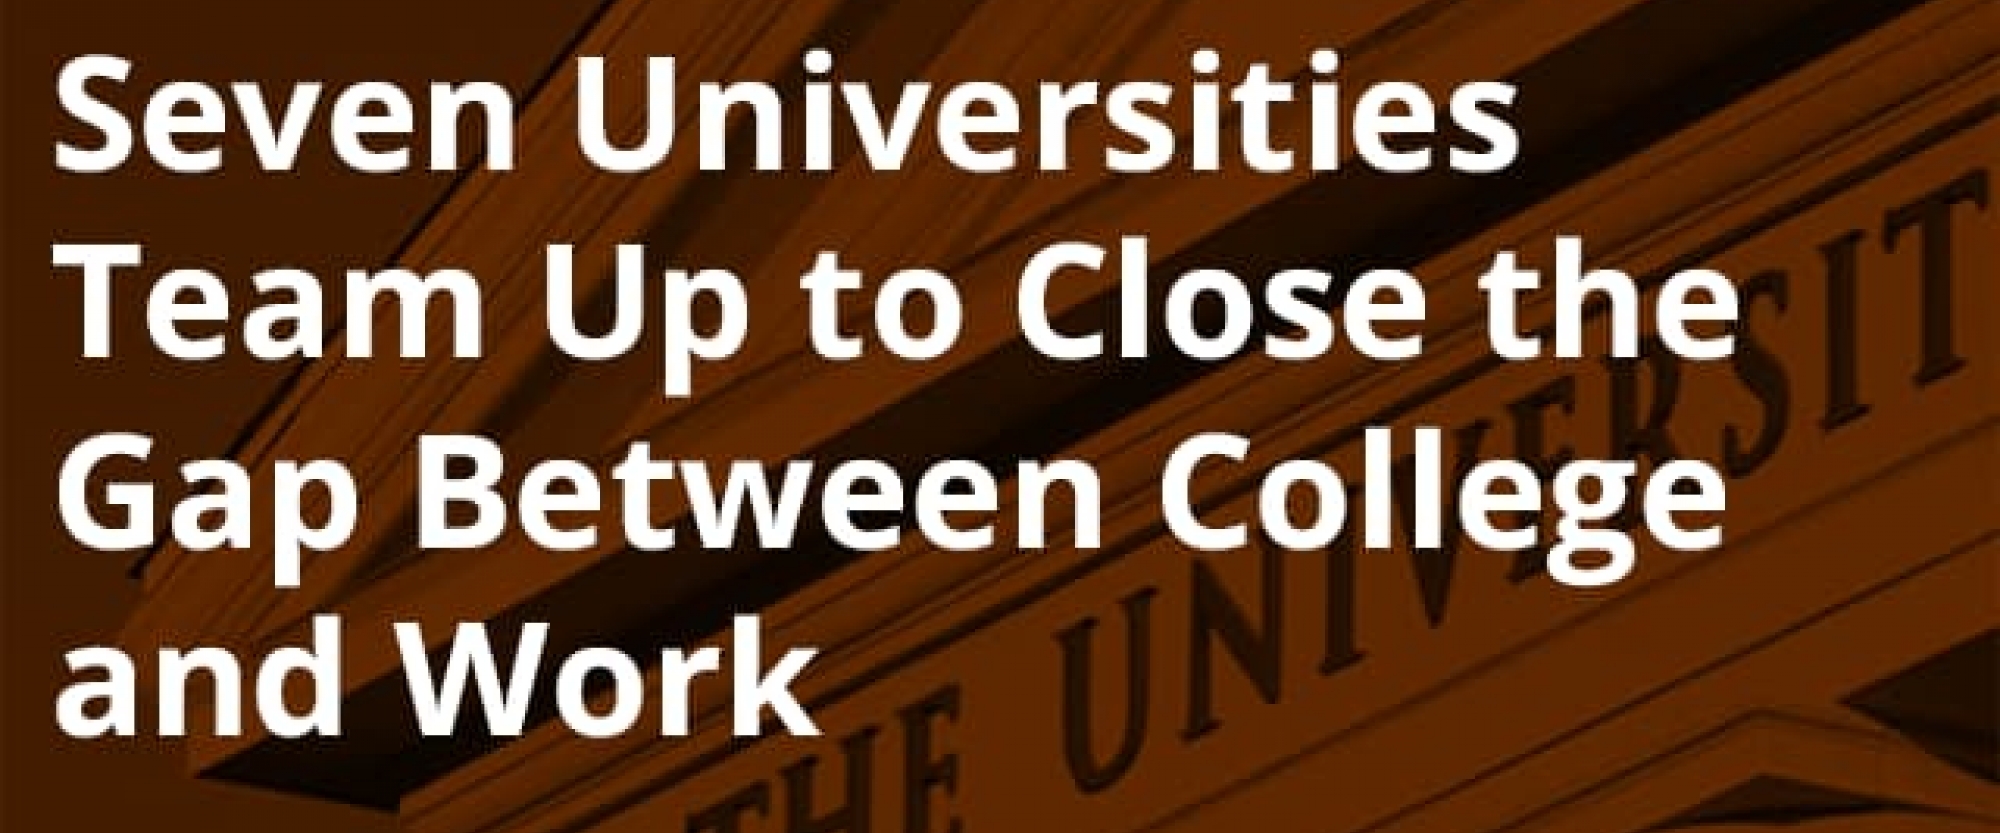 Seven Universities Team Up to Close the Gap Between College and Work